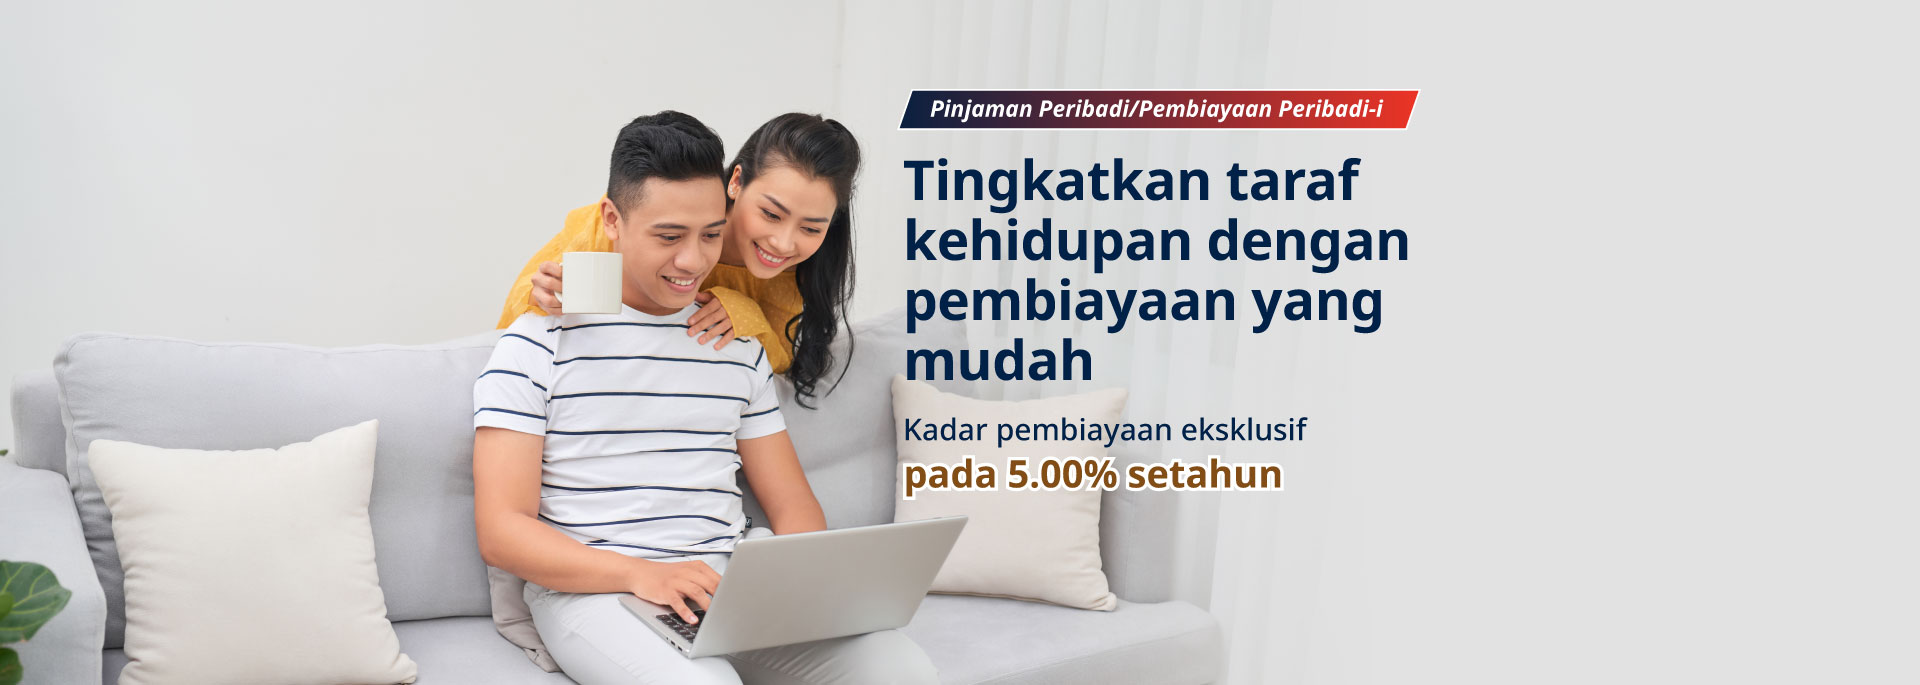 Personal Loan/Financing-i Connect Offer